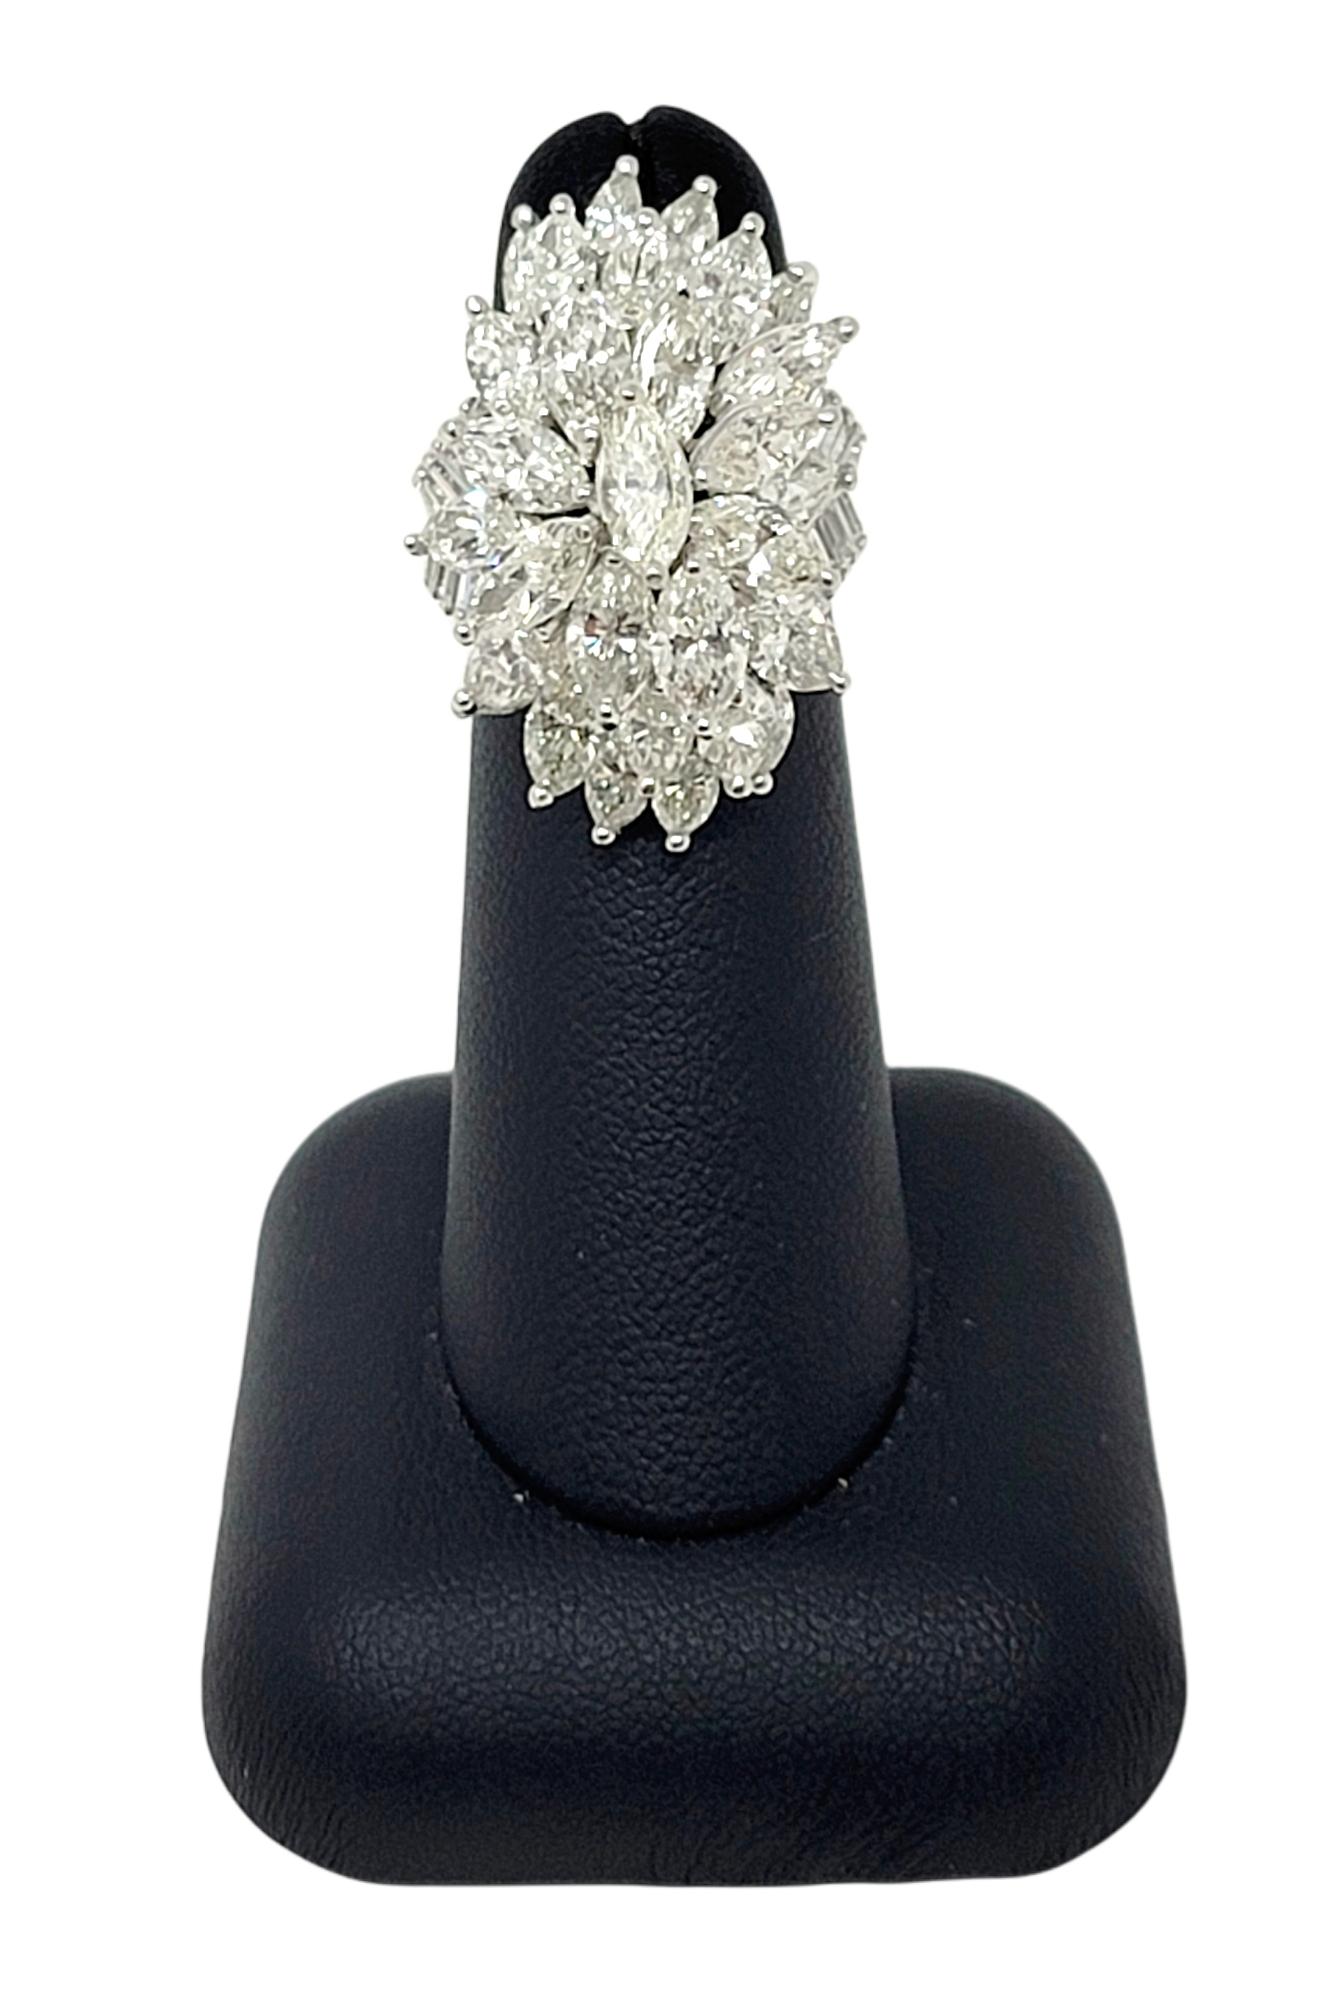 7.75 Carats Marquis and Baguette Diamond Cluster Cocktail Ring in 18 Karat Gold  7